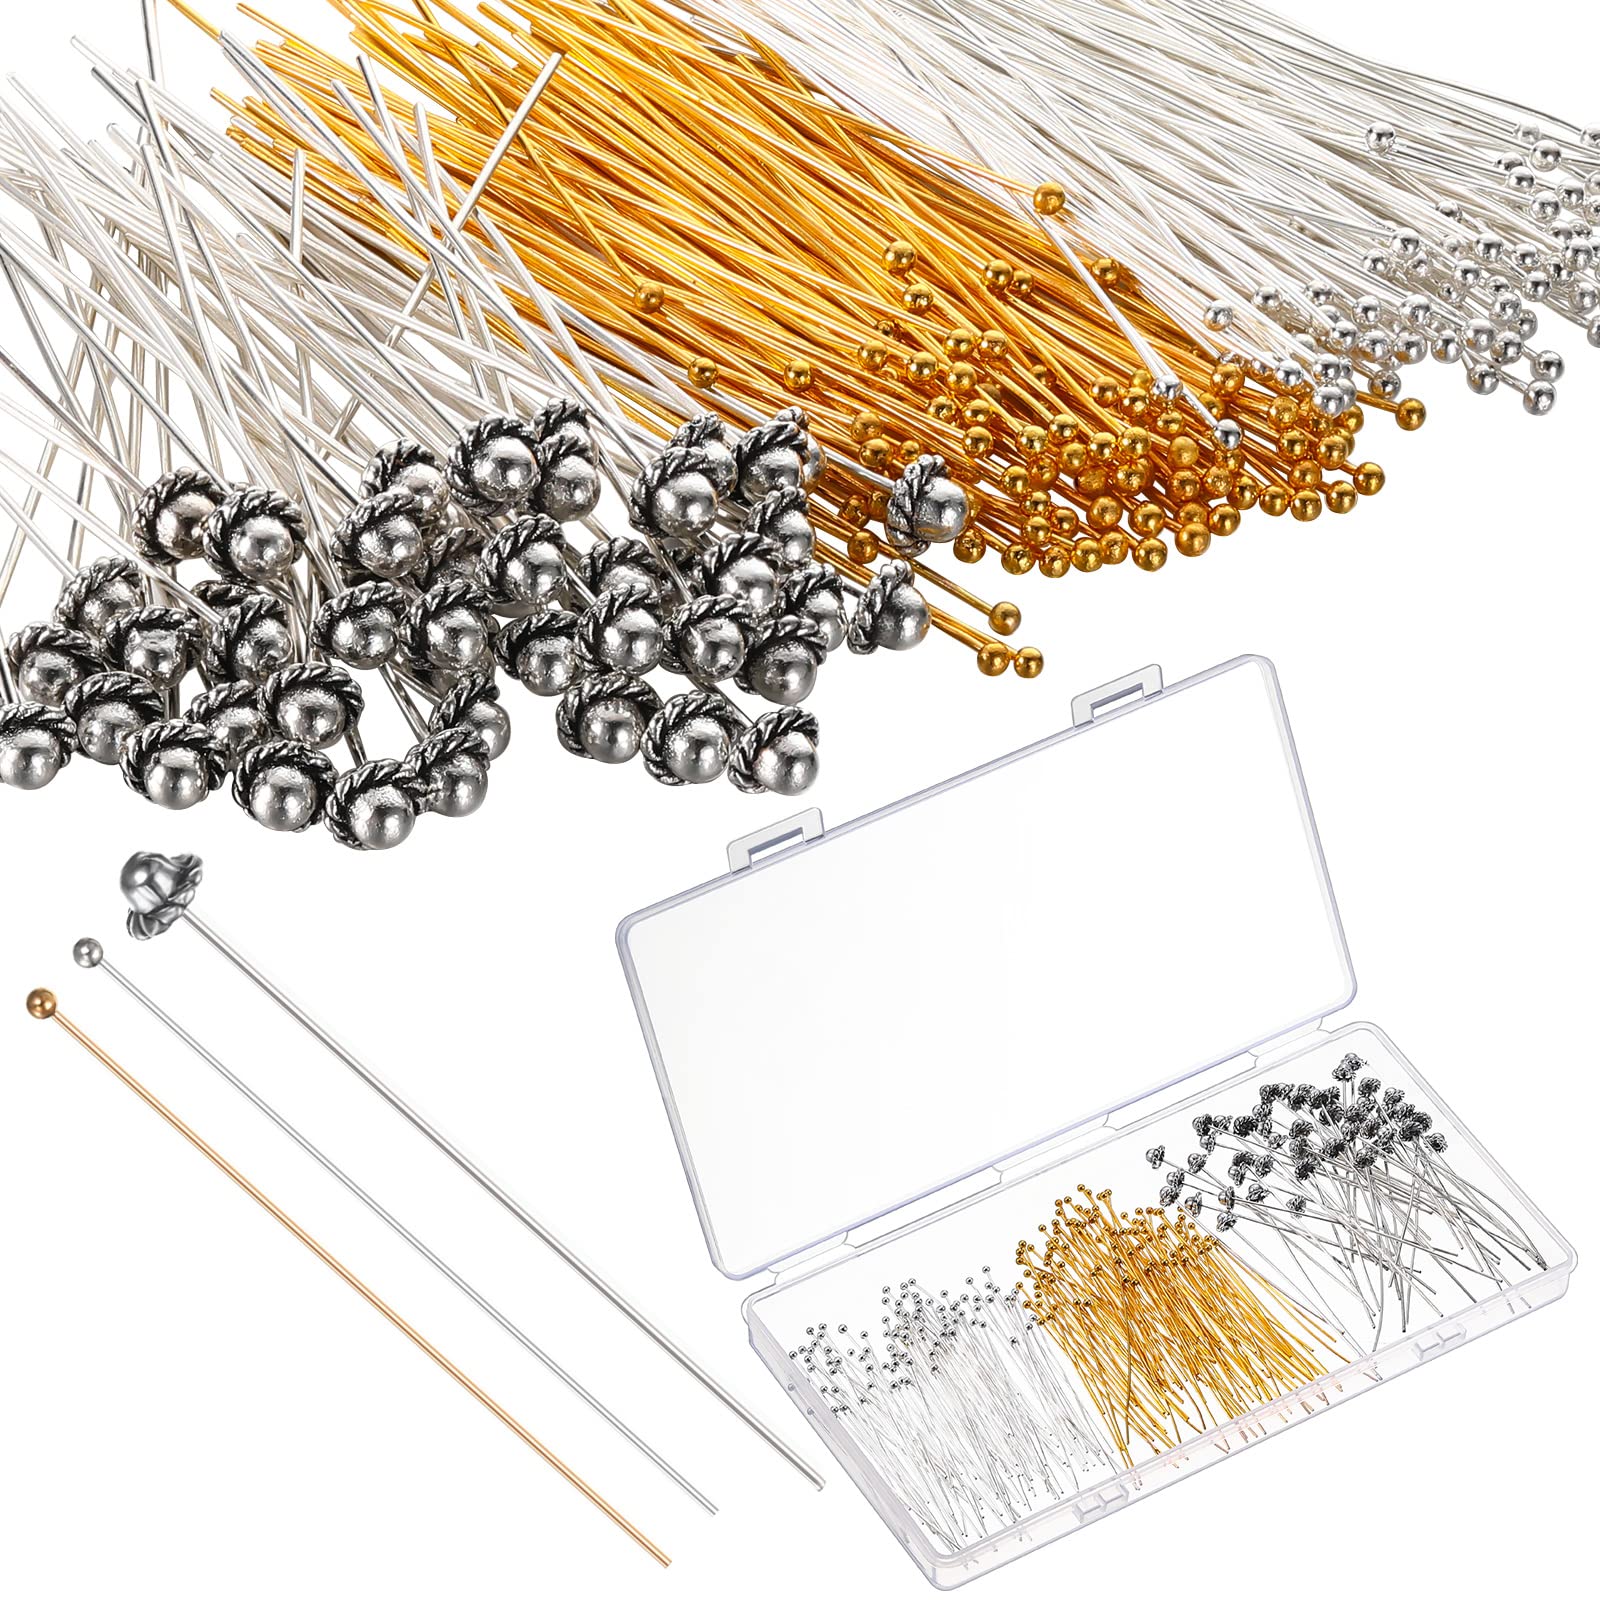 250 Pieces Head Pins for Jewelry Making Include 200 Pieces 2 Inch